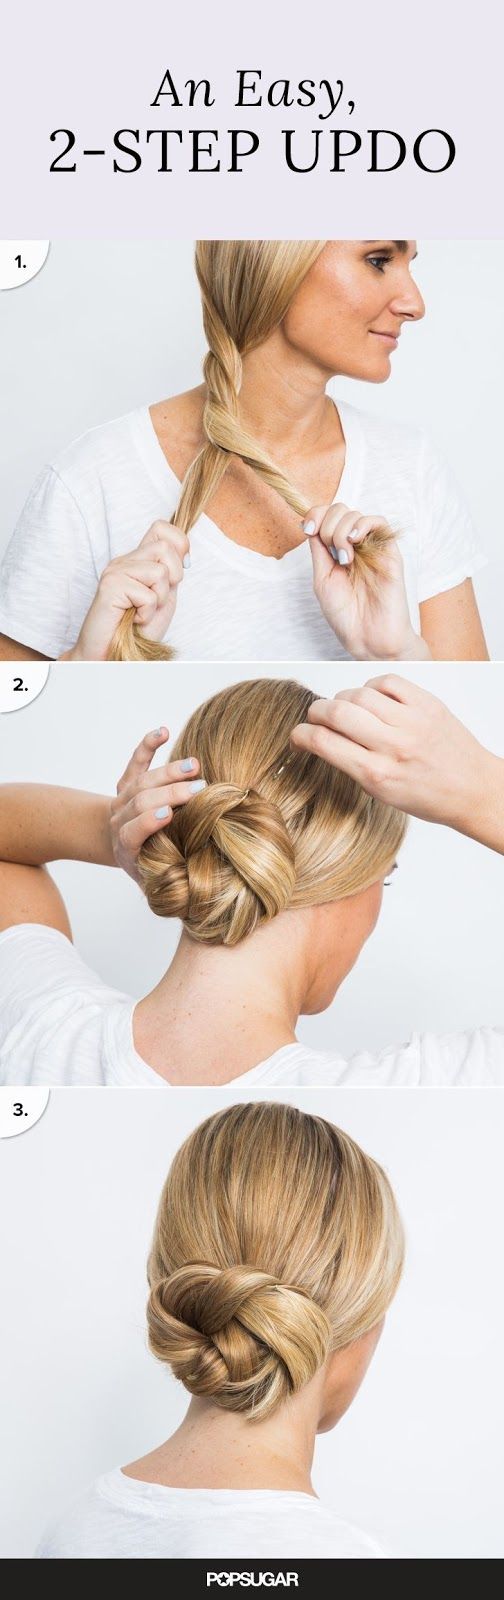 Mariage - Pinterest Inspiration: Hairstyles We Love!